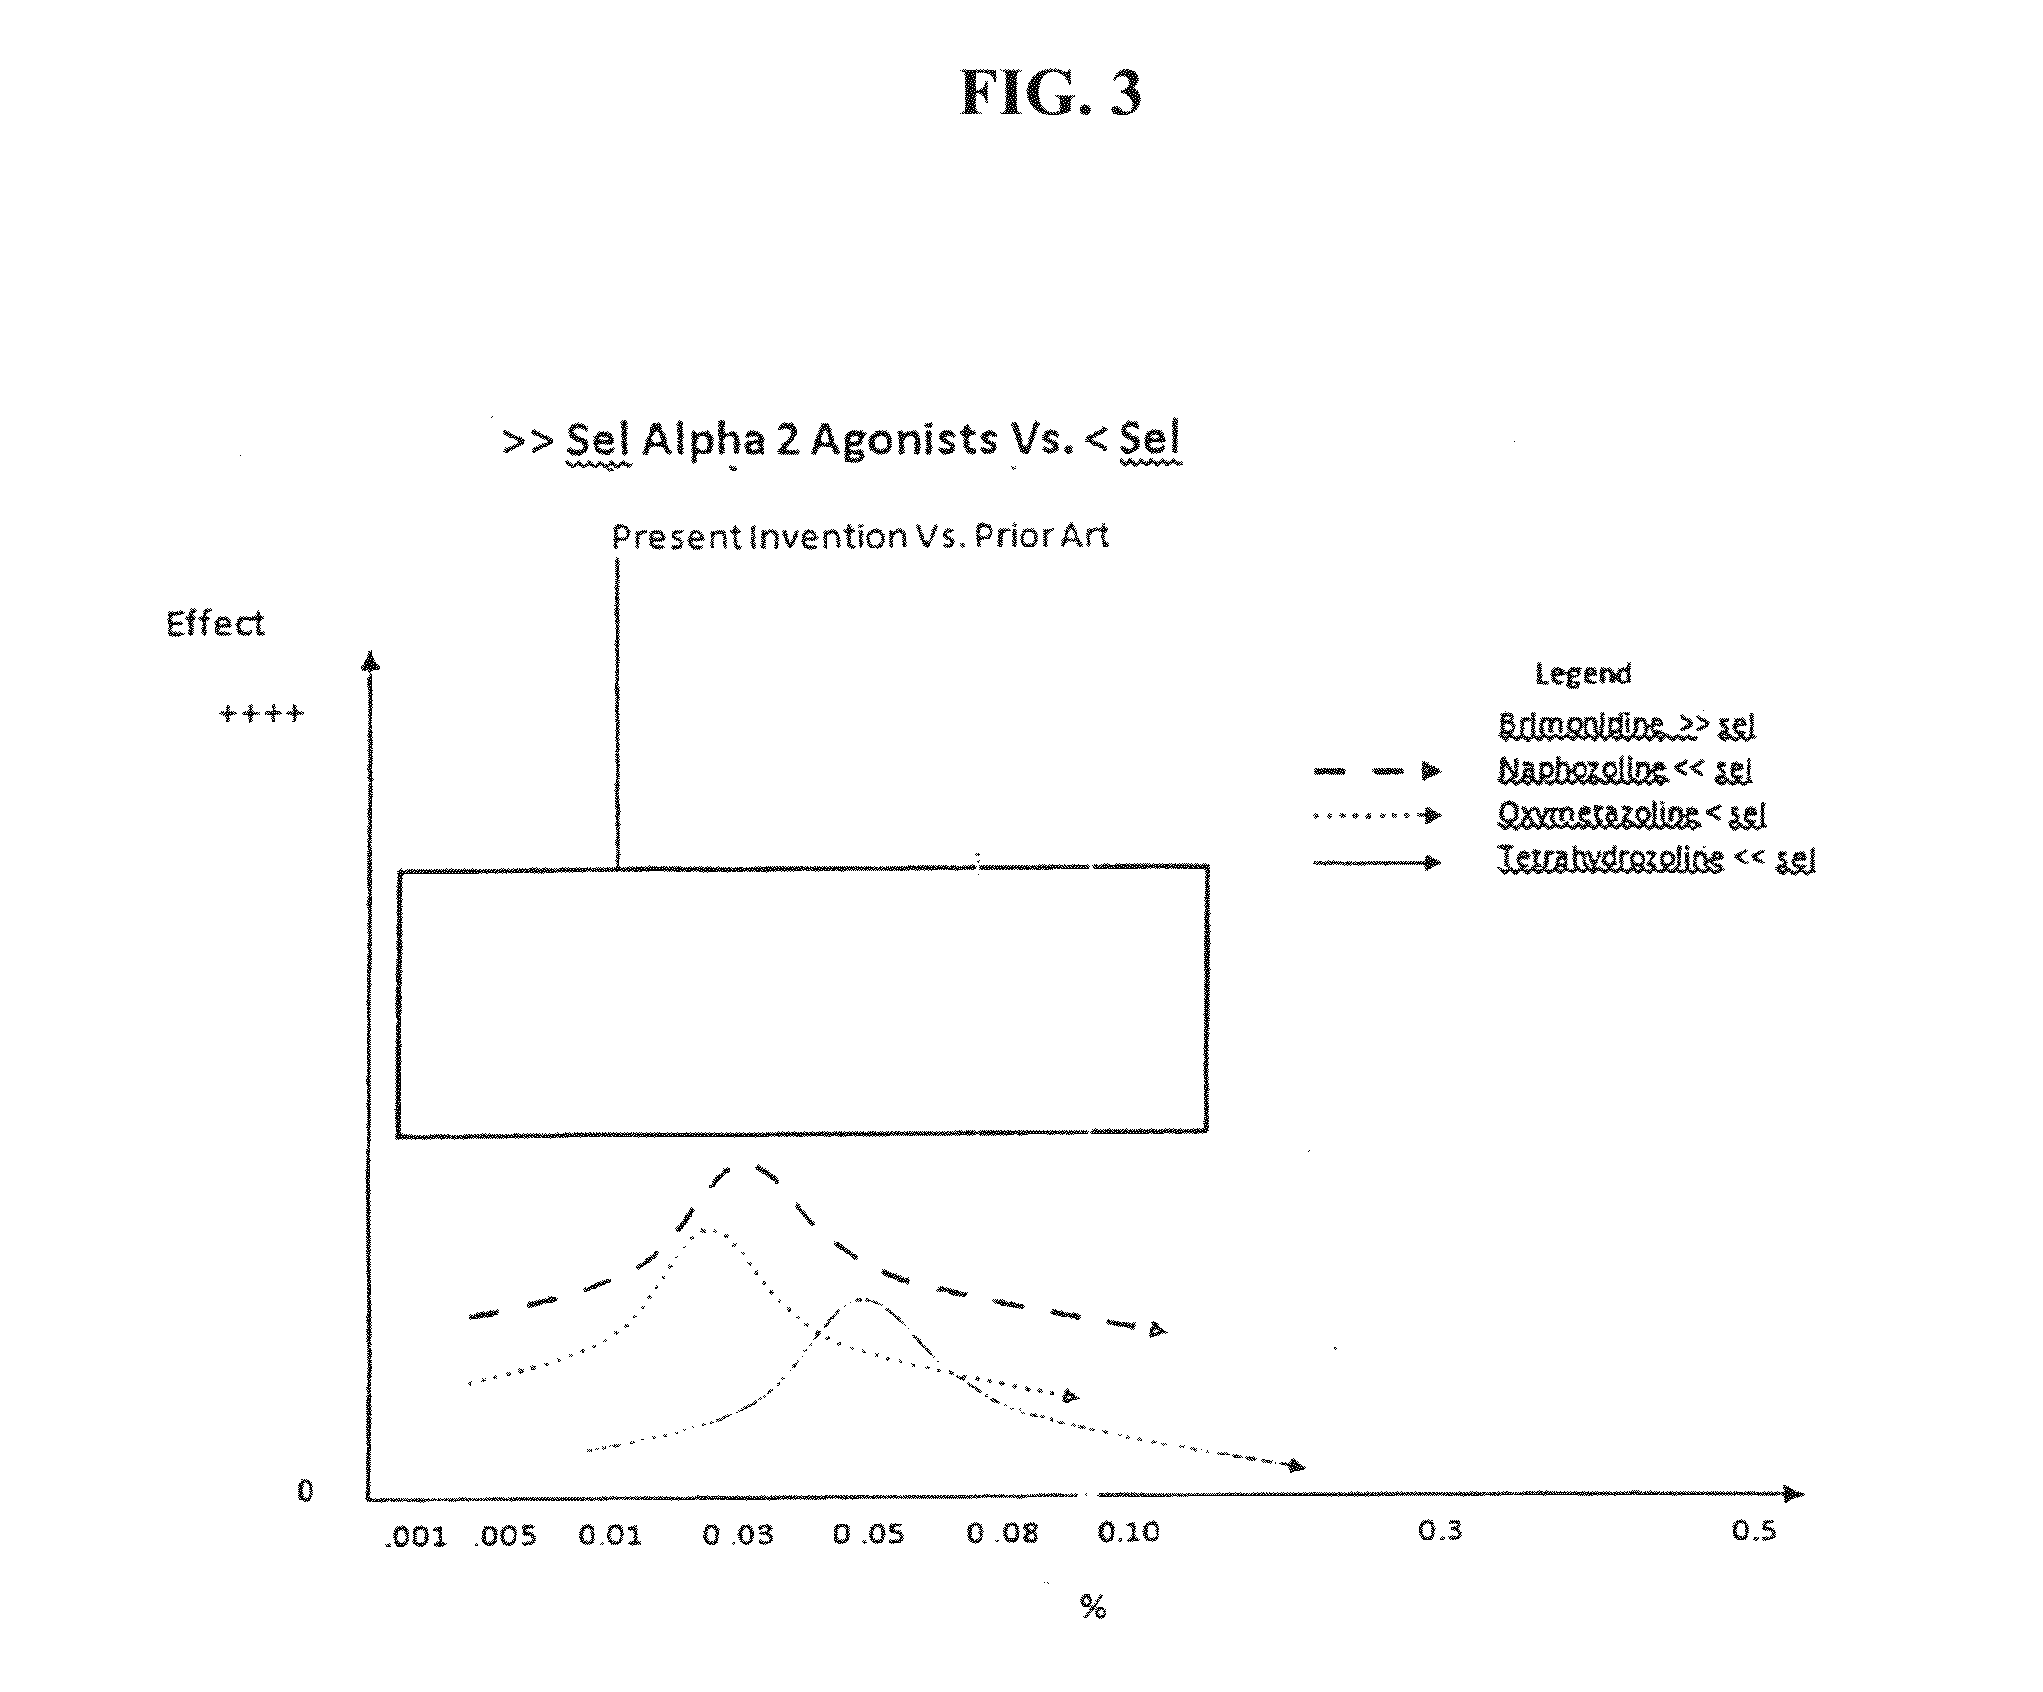 Preferential vasoconstriction compositions and methods of use